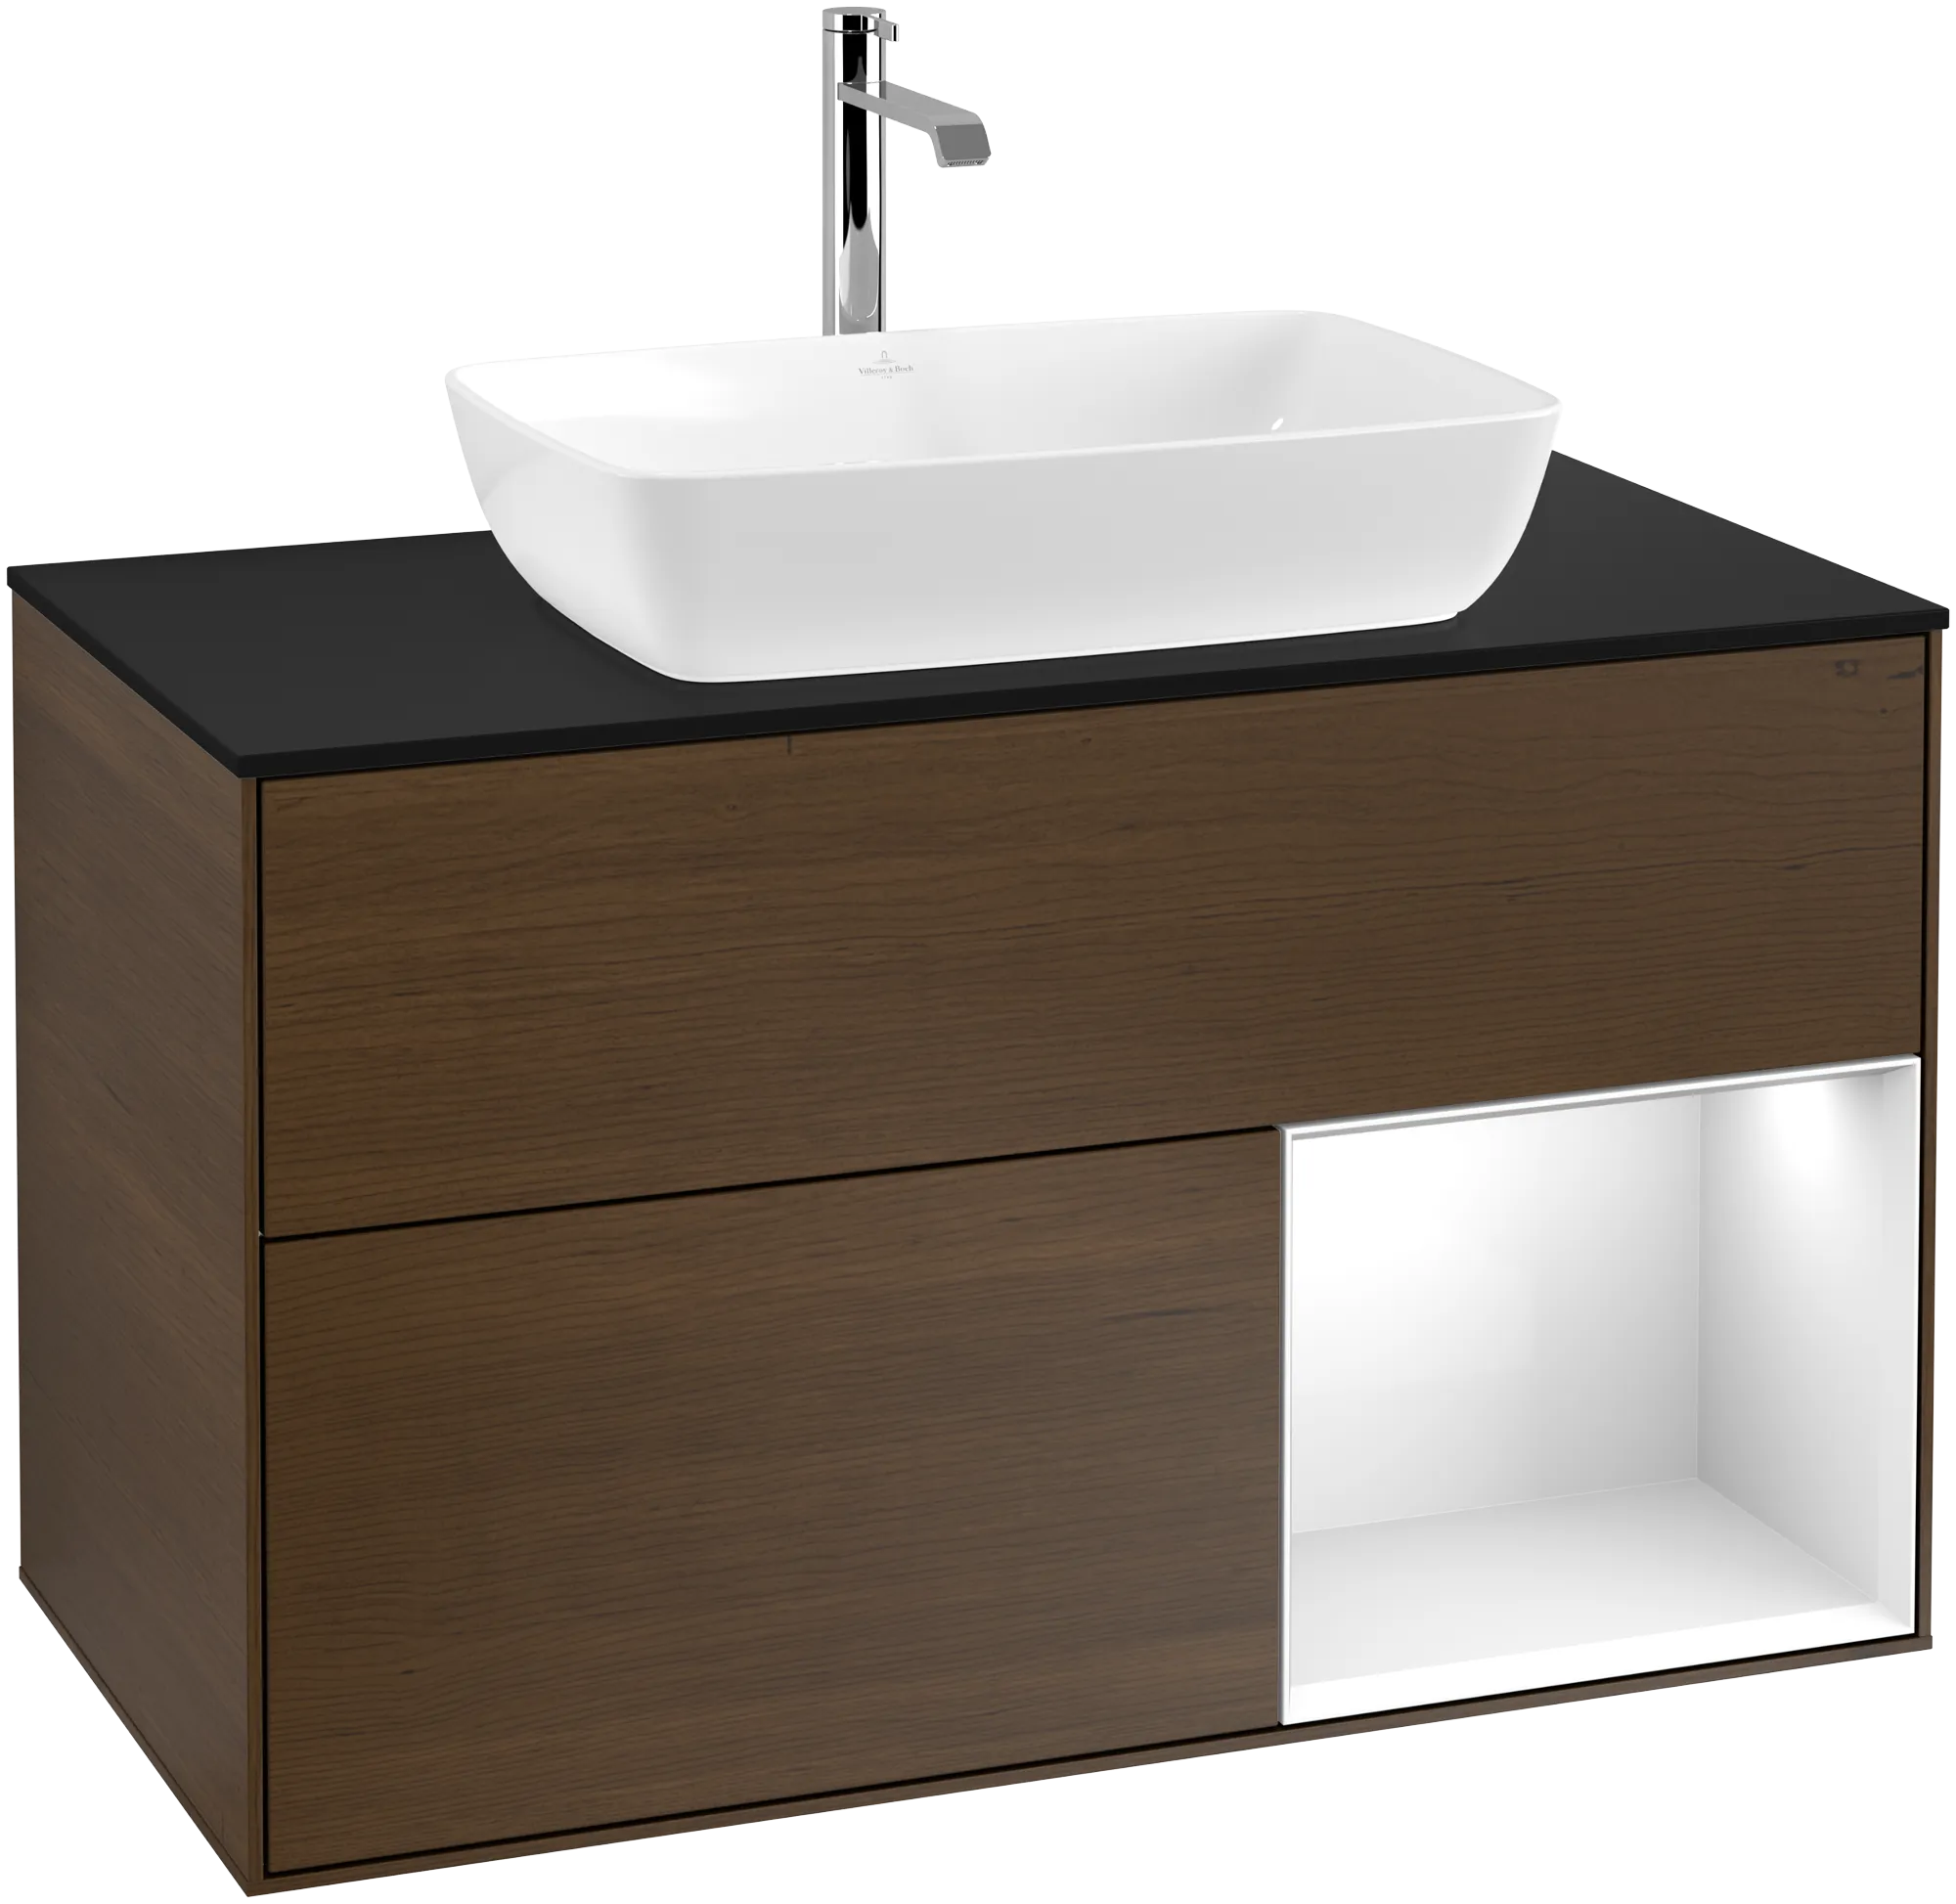 Picture of VILLEROY BOCH Finion Vanity unit, with lighting, 2 pull-out compartments, 1000 x 603 x 501 mm, Walnut Veneer / Glossy White Lacquer / Glass Black Matt #G782GFGN